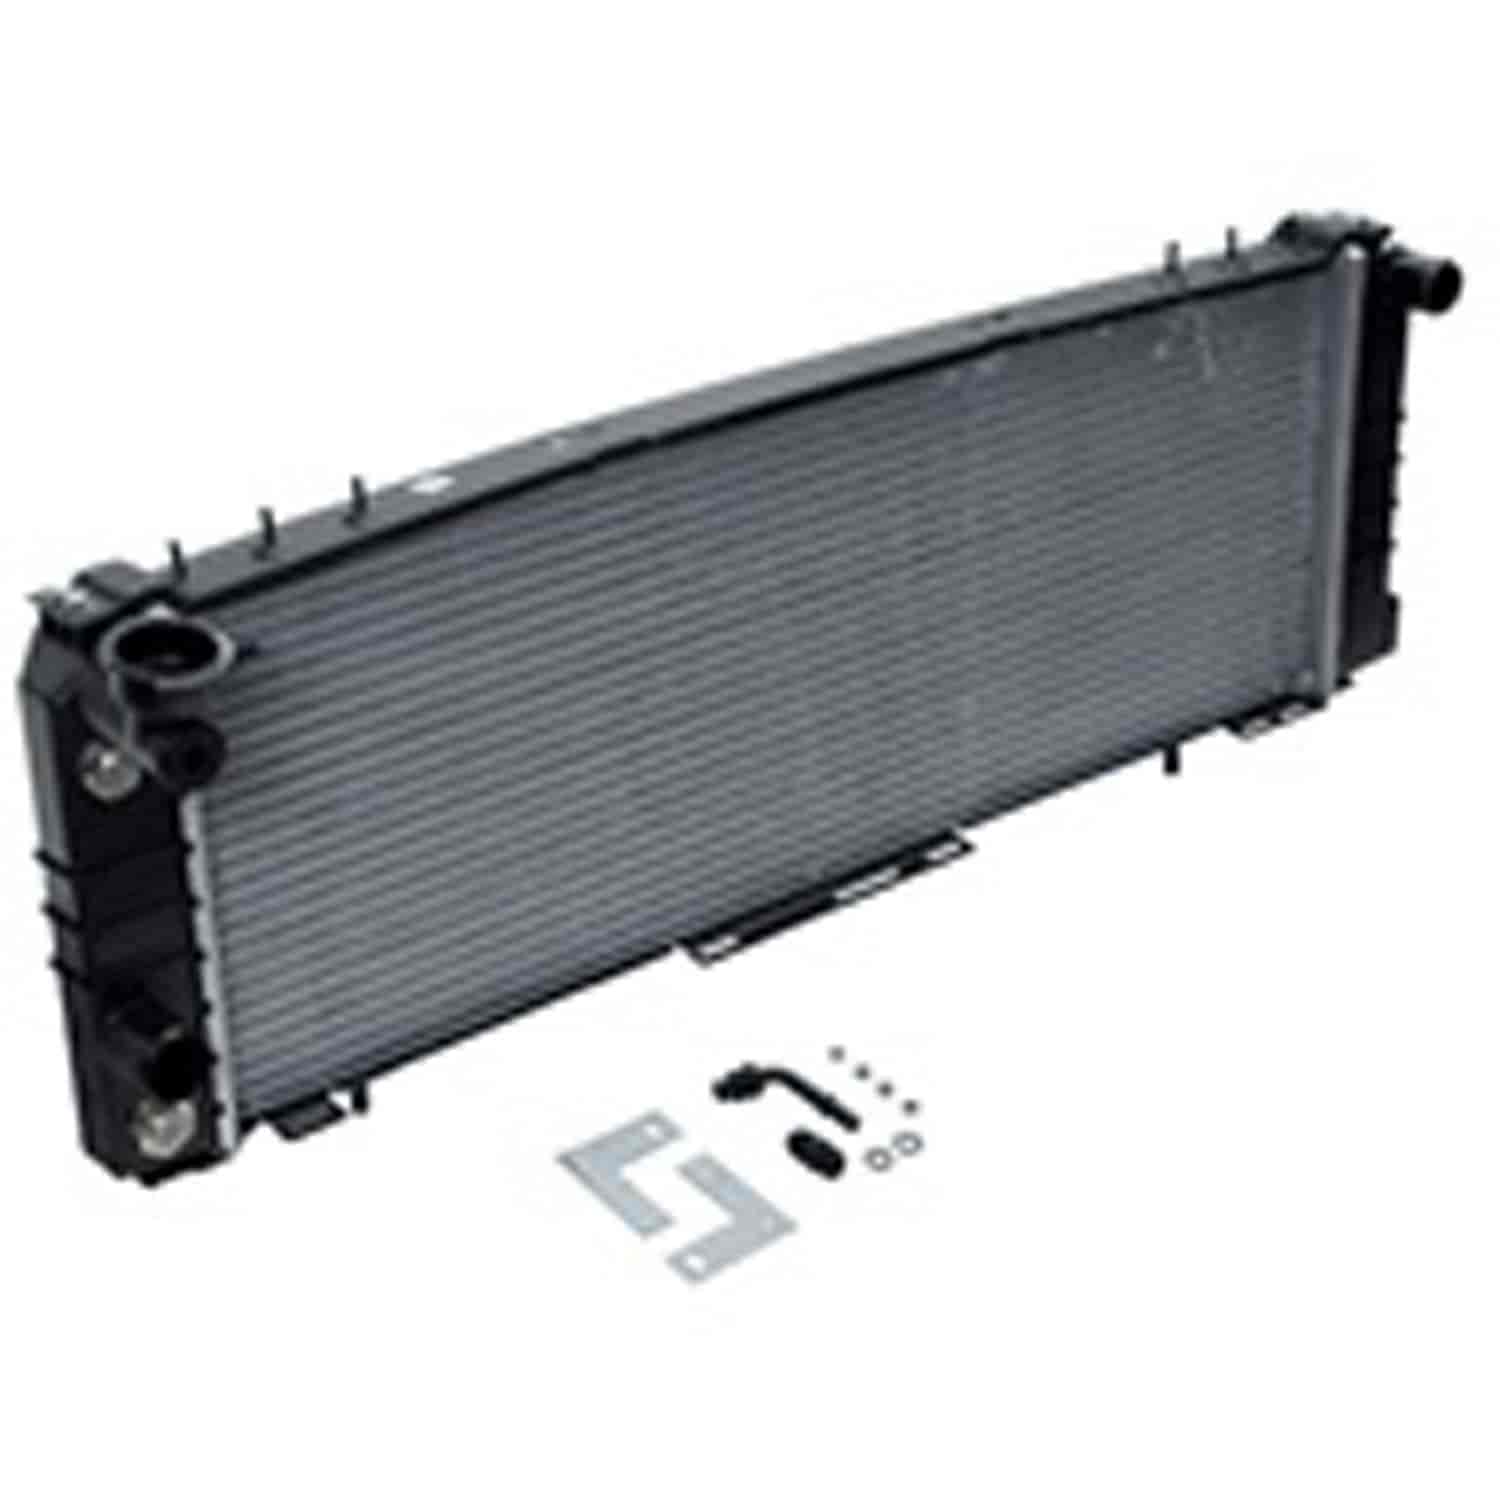 This 1 row radiator from Omix-ADA fits 01 Jeep Cherokee XJ.